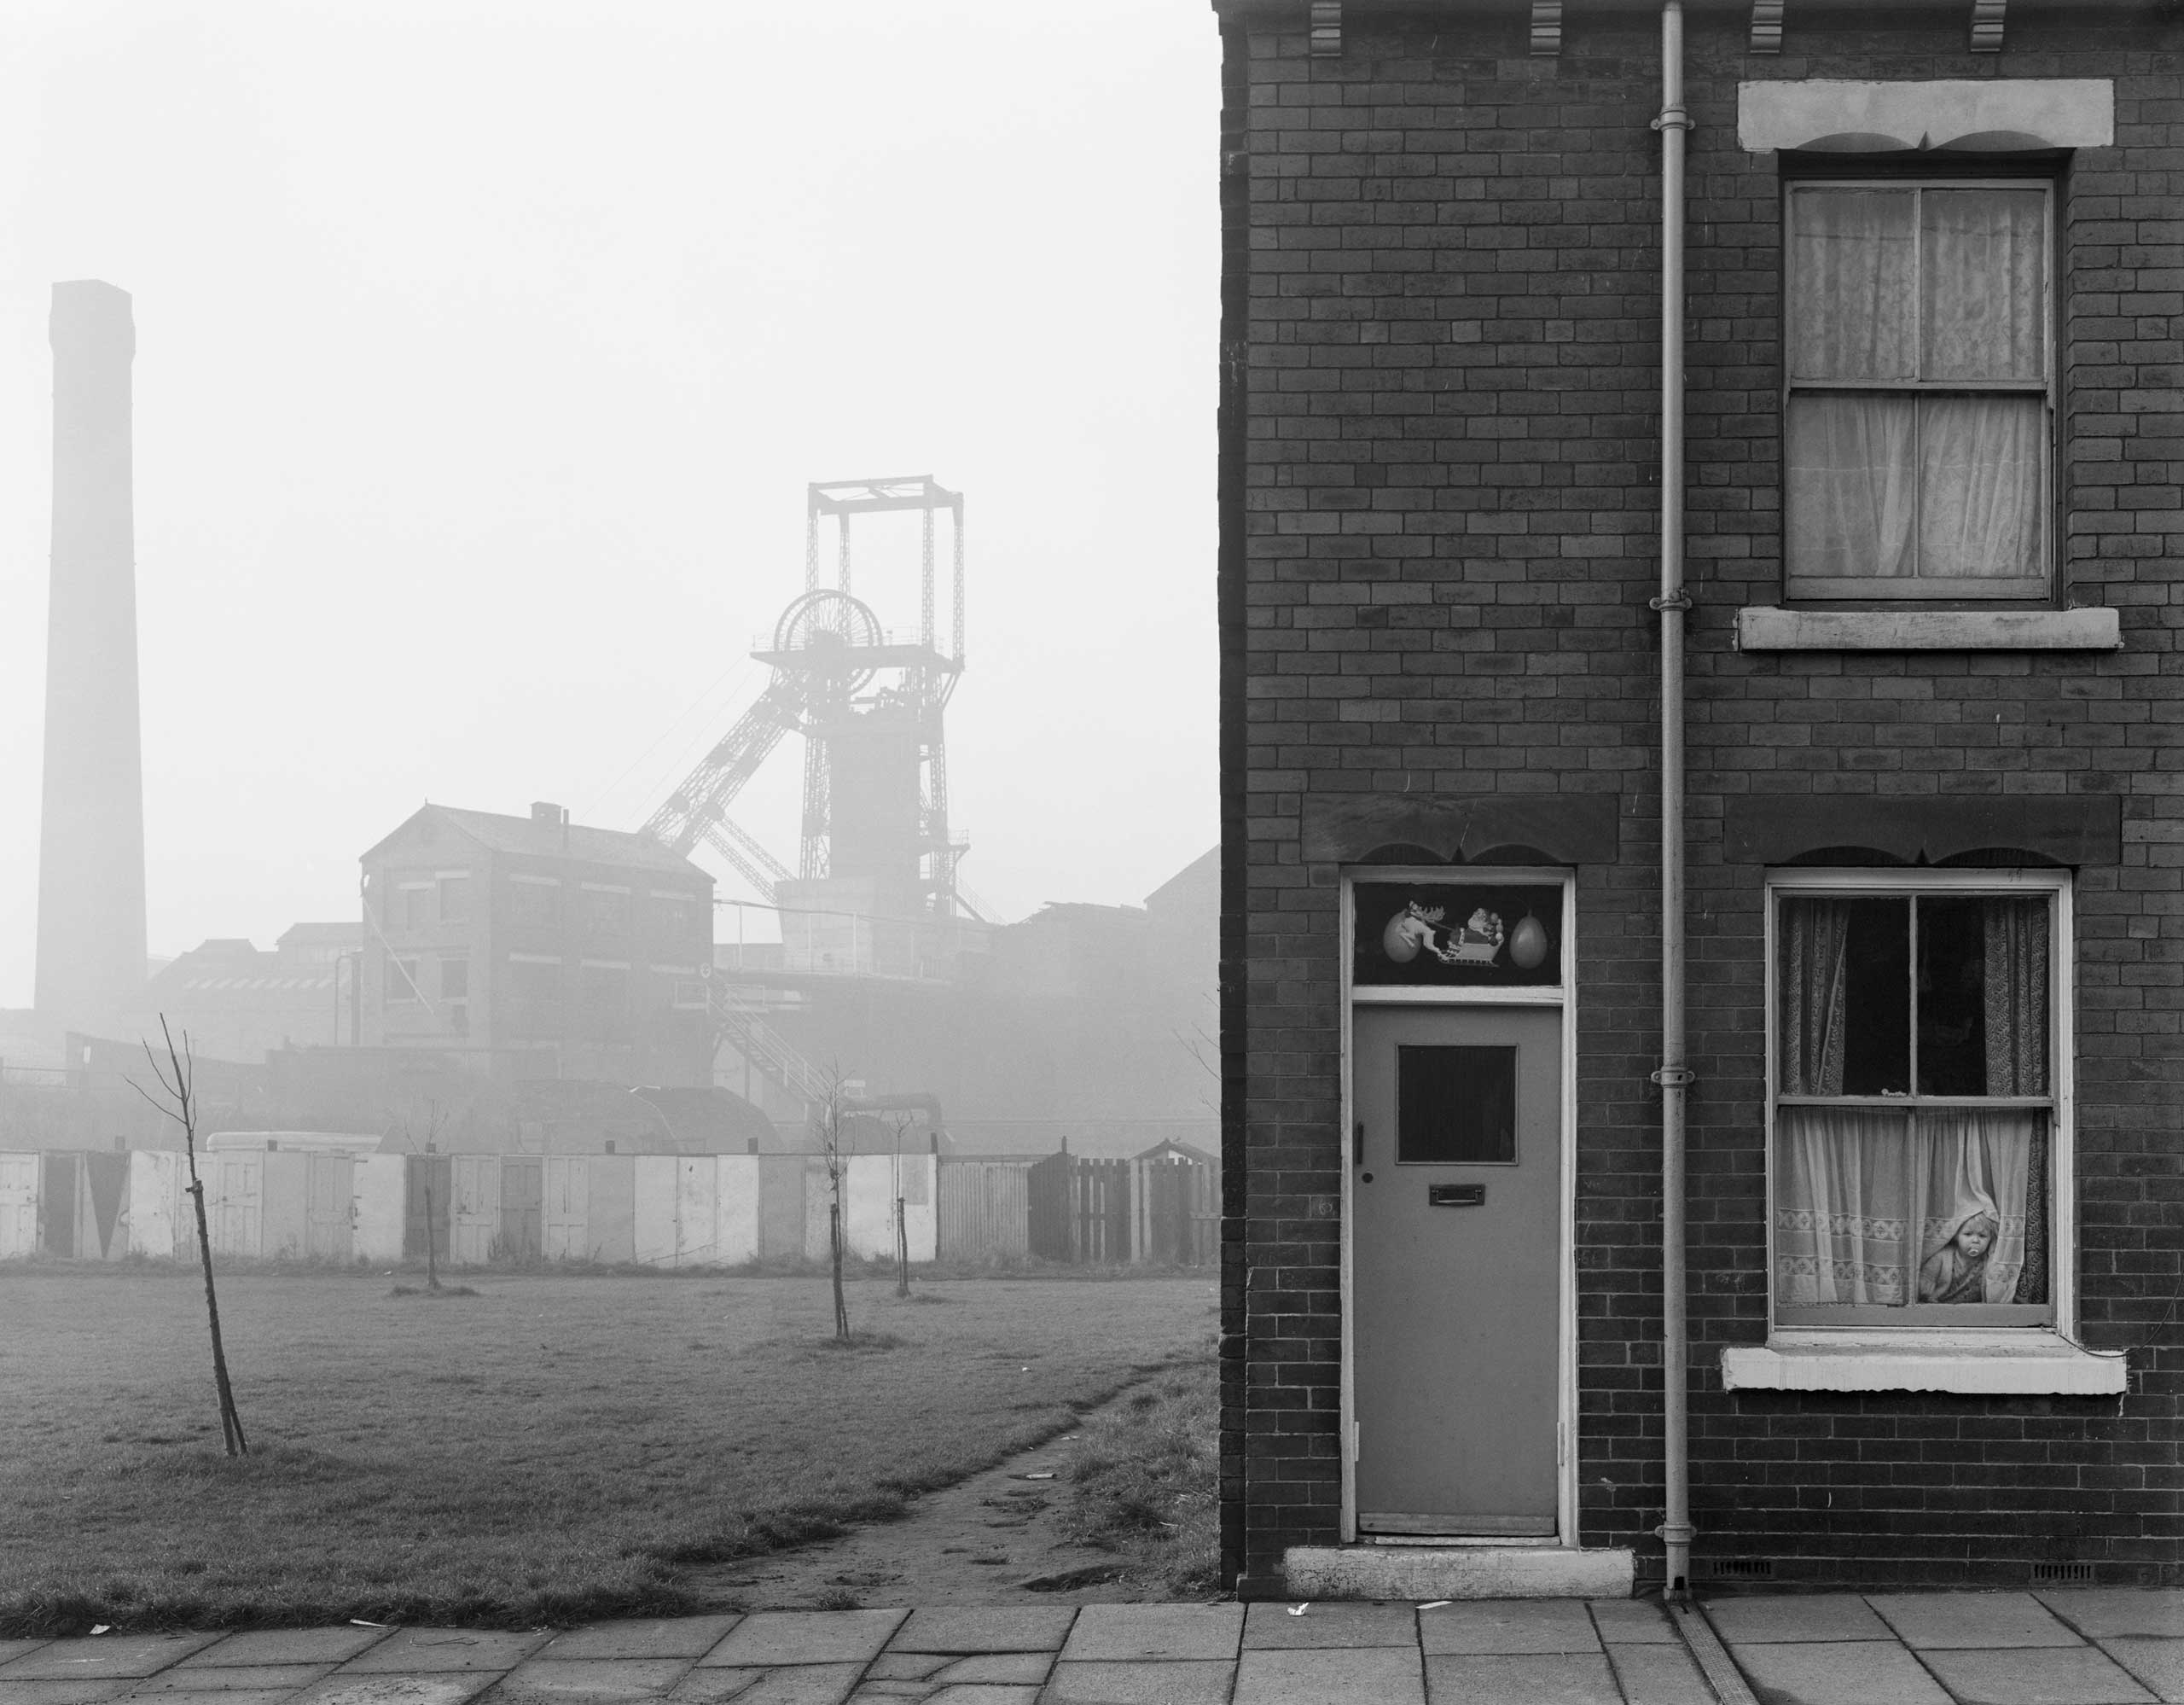 Coalmine and terraced housing, Castleford, Yorkshire, 1976